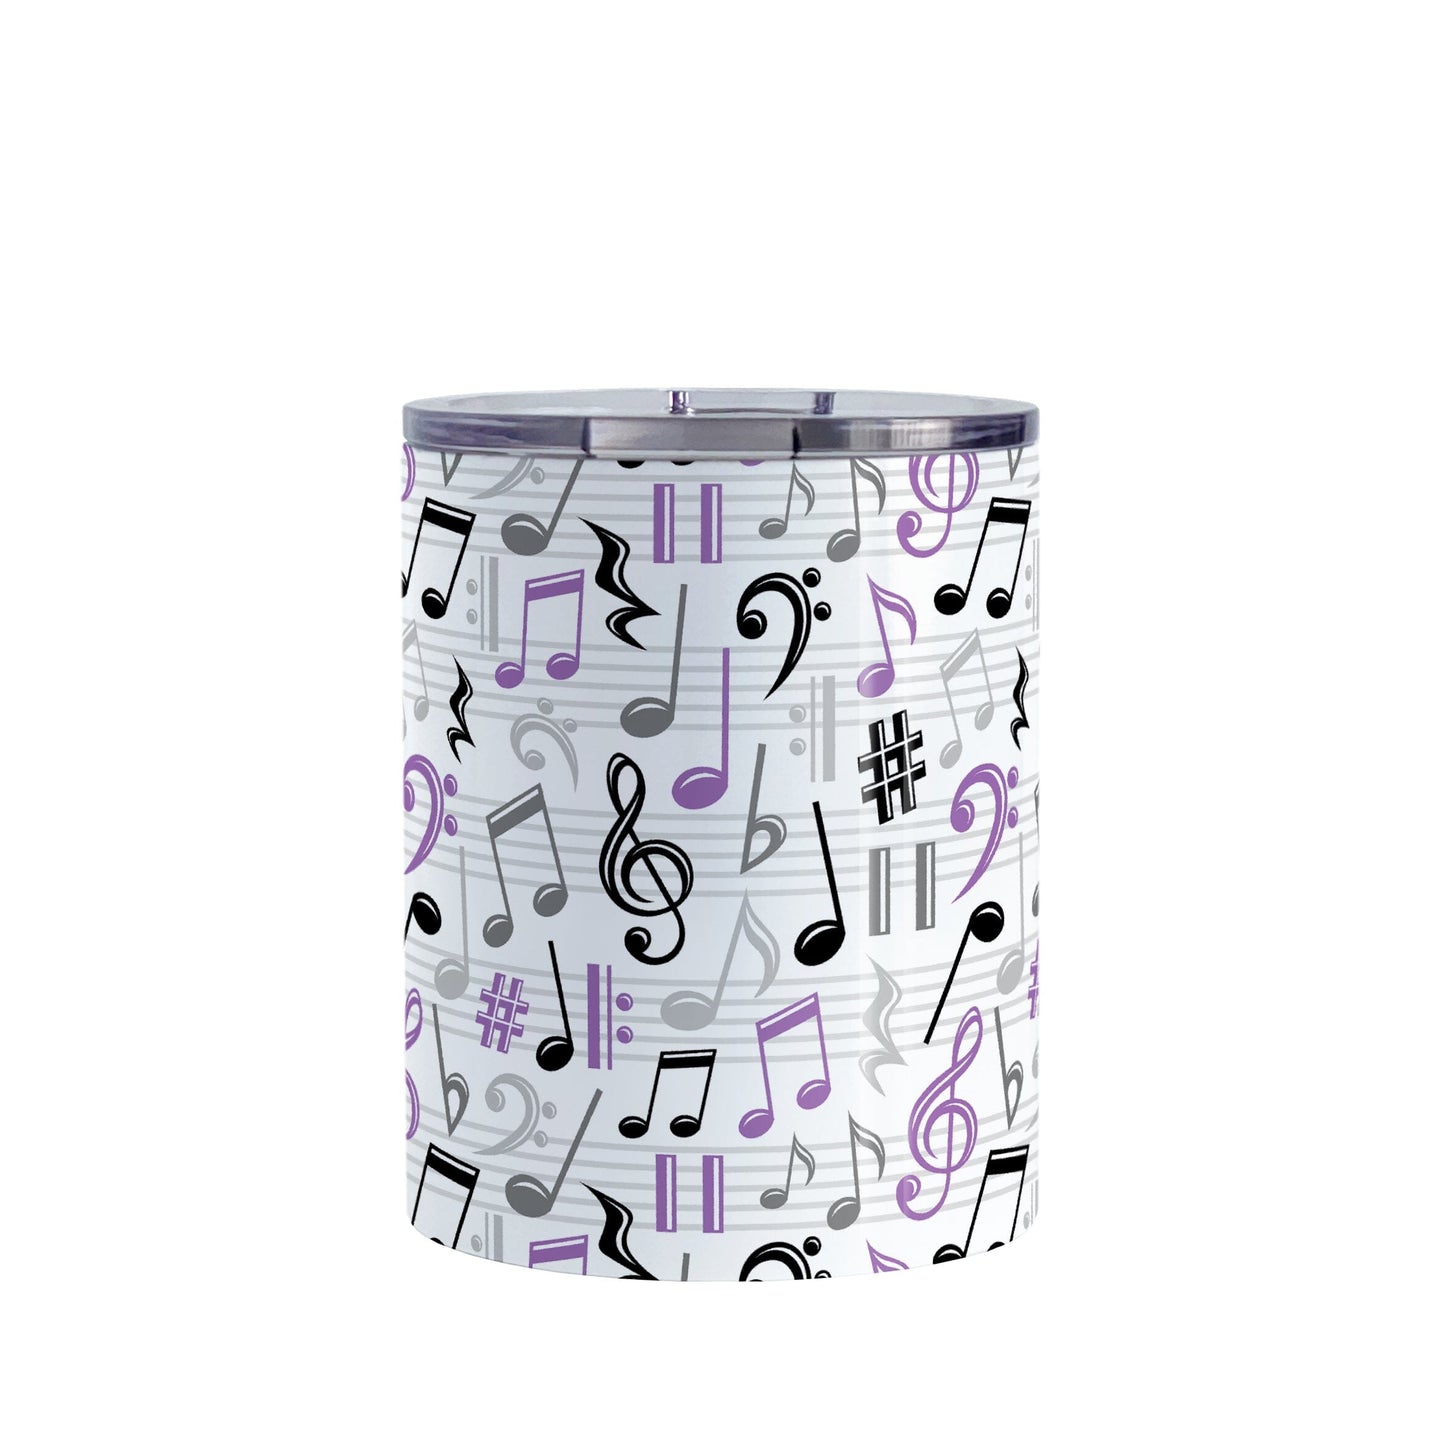 Purple Music Notes Pattern Tumbler Cup (10oz) at Amy's Coffee Mugs. A stainless steel tumbler cup designed with music notes and symbols in purple, black, and gray in a pattern that wraps around the cup.